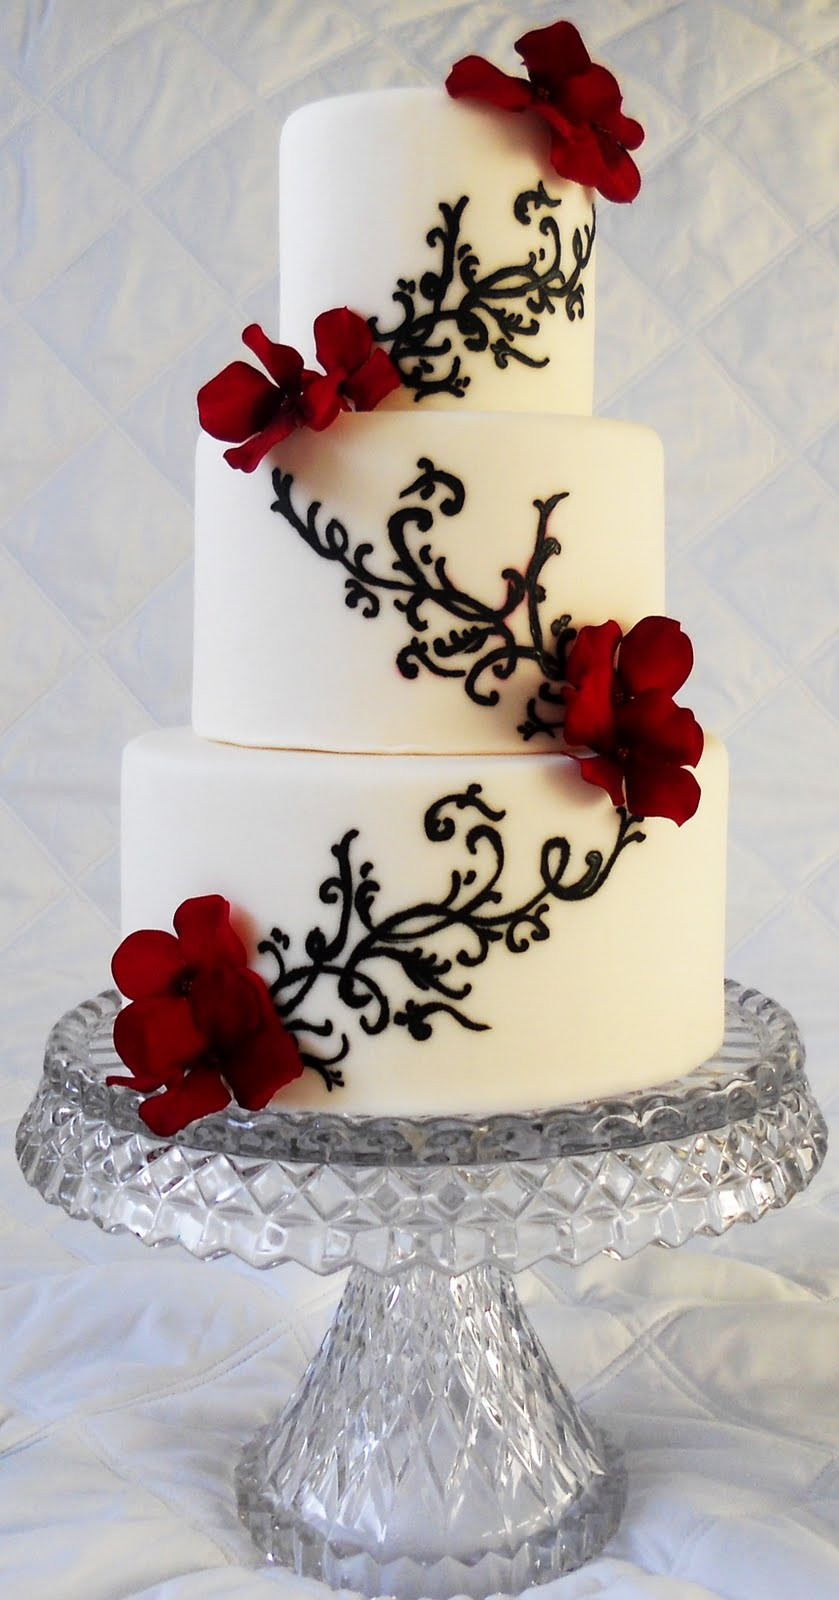 Wedding Cake Red And White
 Memorable Wedding Find the Best Red Black and White